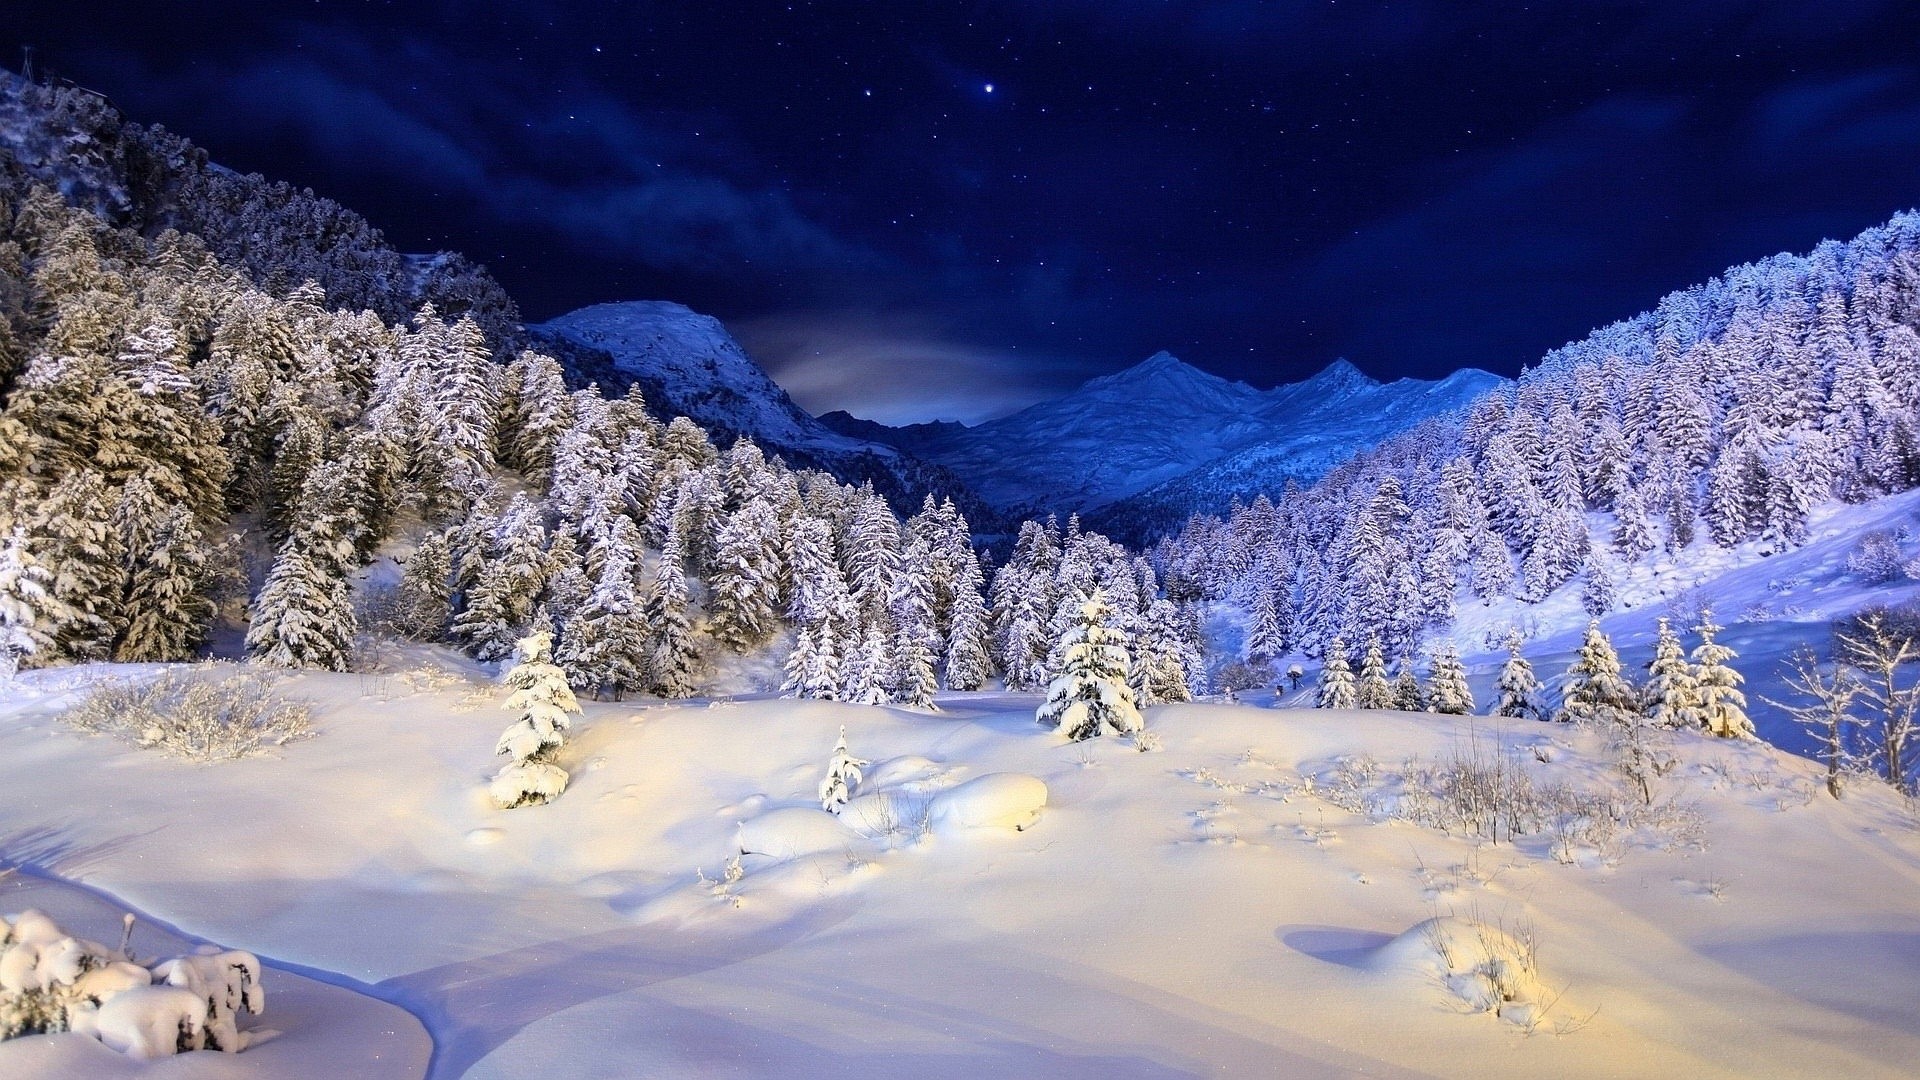 Night in the mountains during the winter Wallpaper 4k Ultra HD ID11051